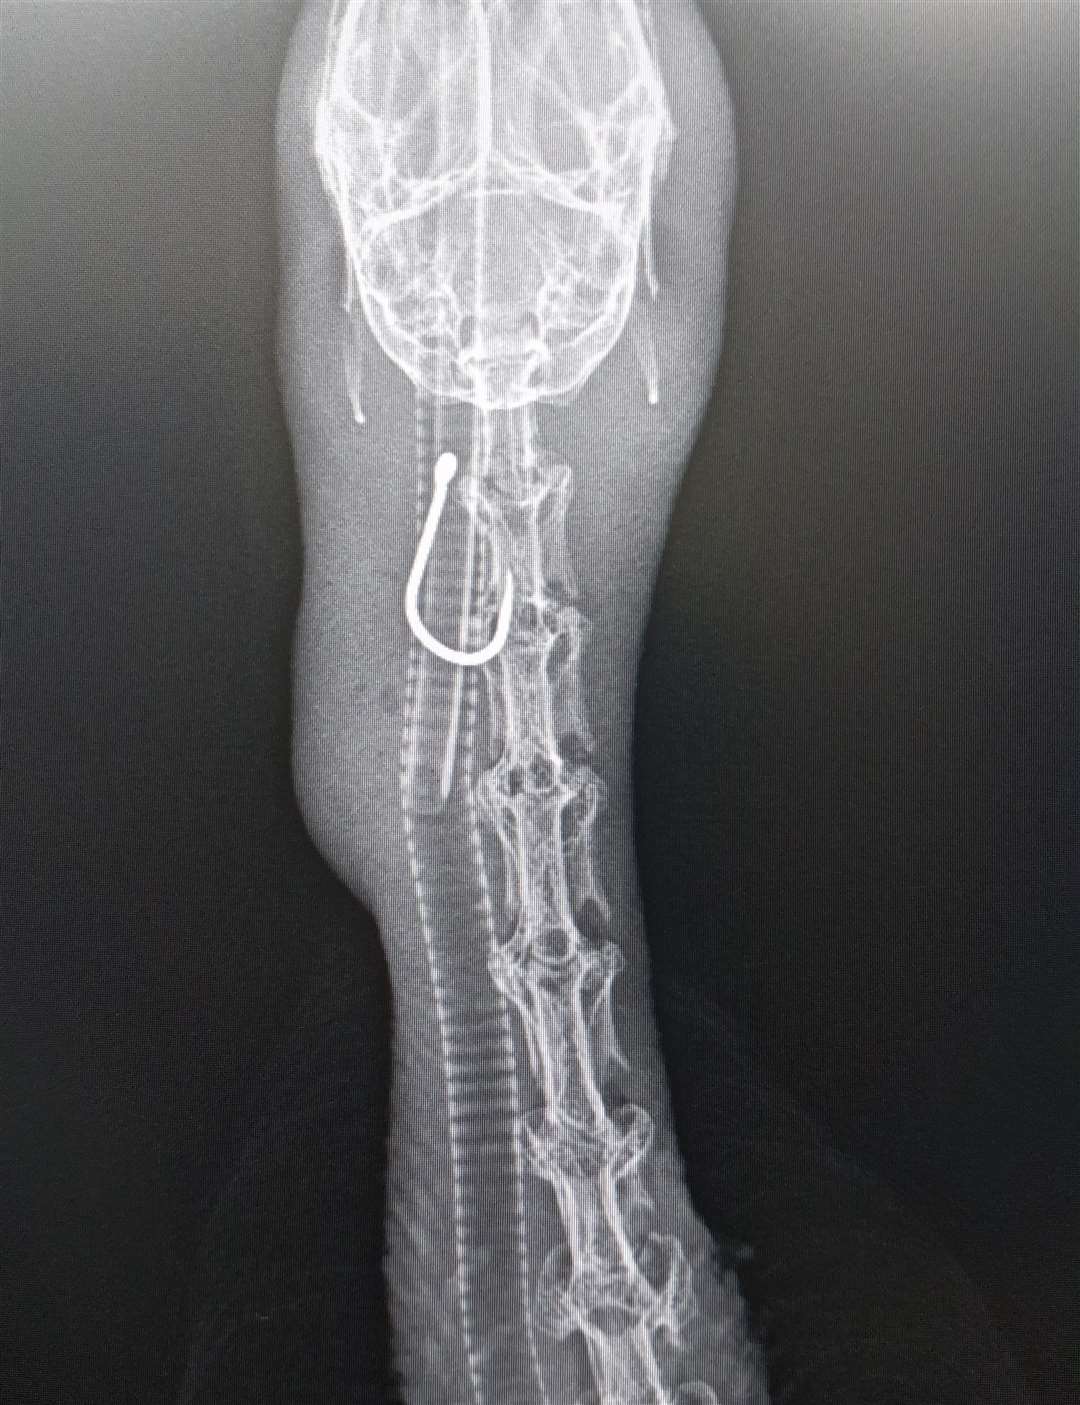 An X-ray shows the hook in the duck's throat